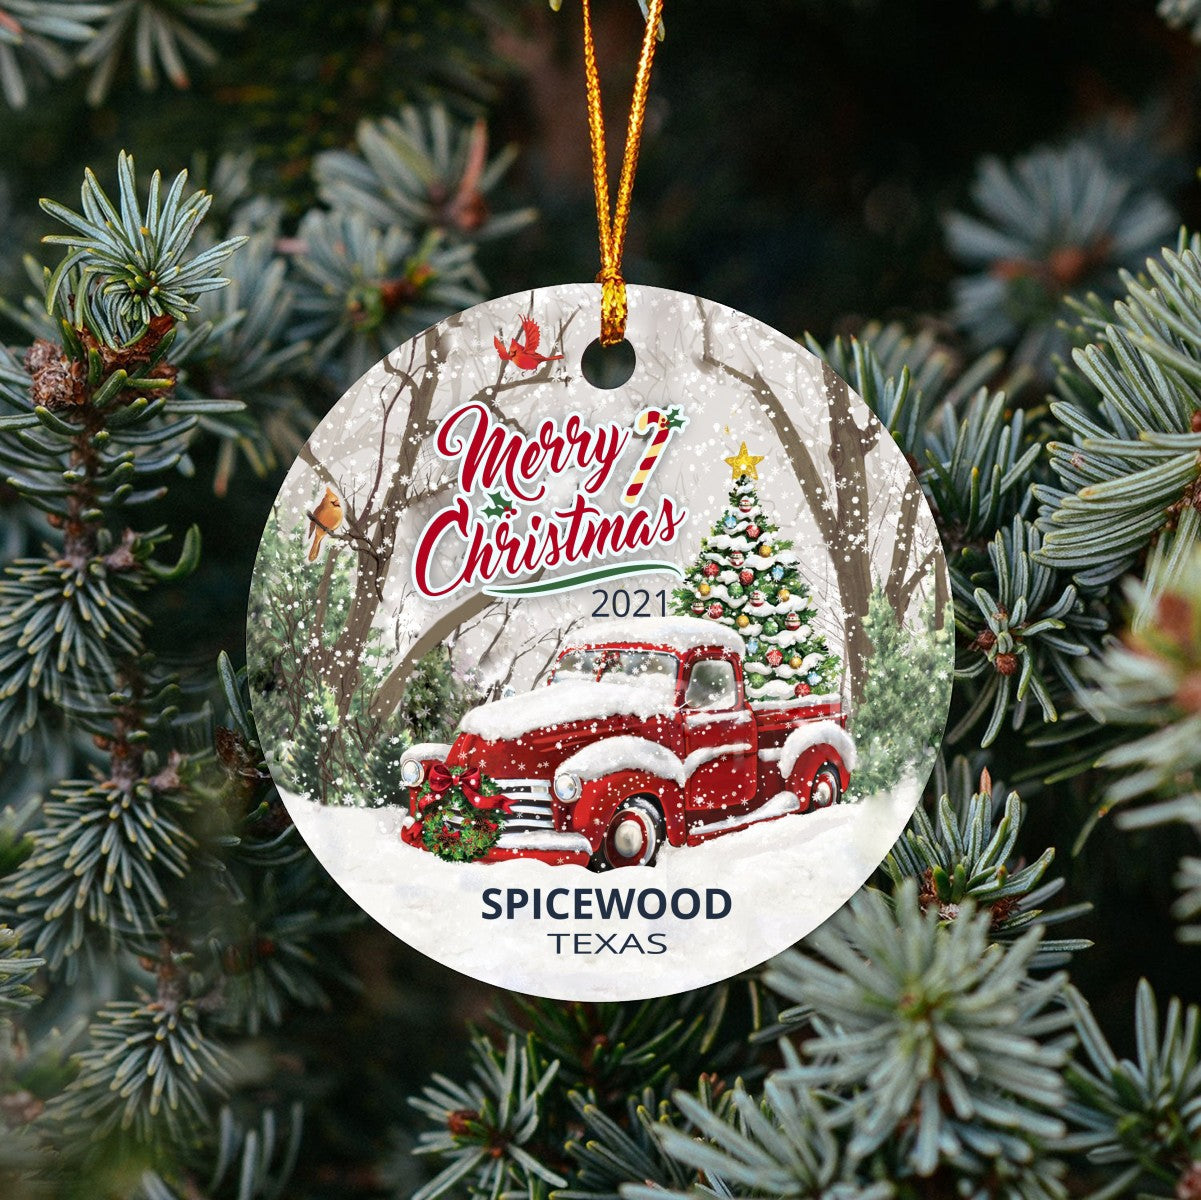 Christmas Tree Ornaments Spicewood - Ornament With Name City, State Spicewood Texas TX Ornament - Red Truck Xmas Ornaments 3'' Plastic Gift For Family, Friend And Housewarming